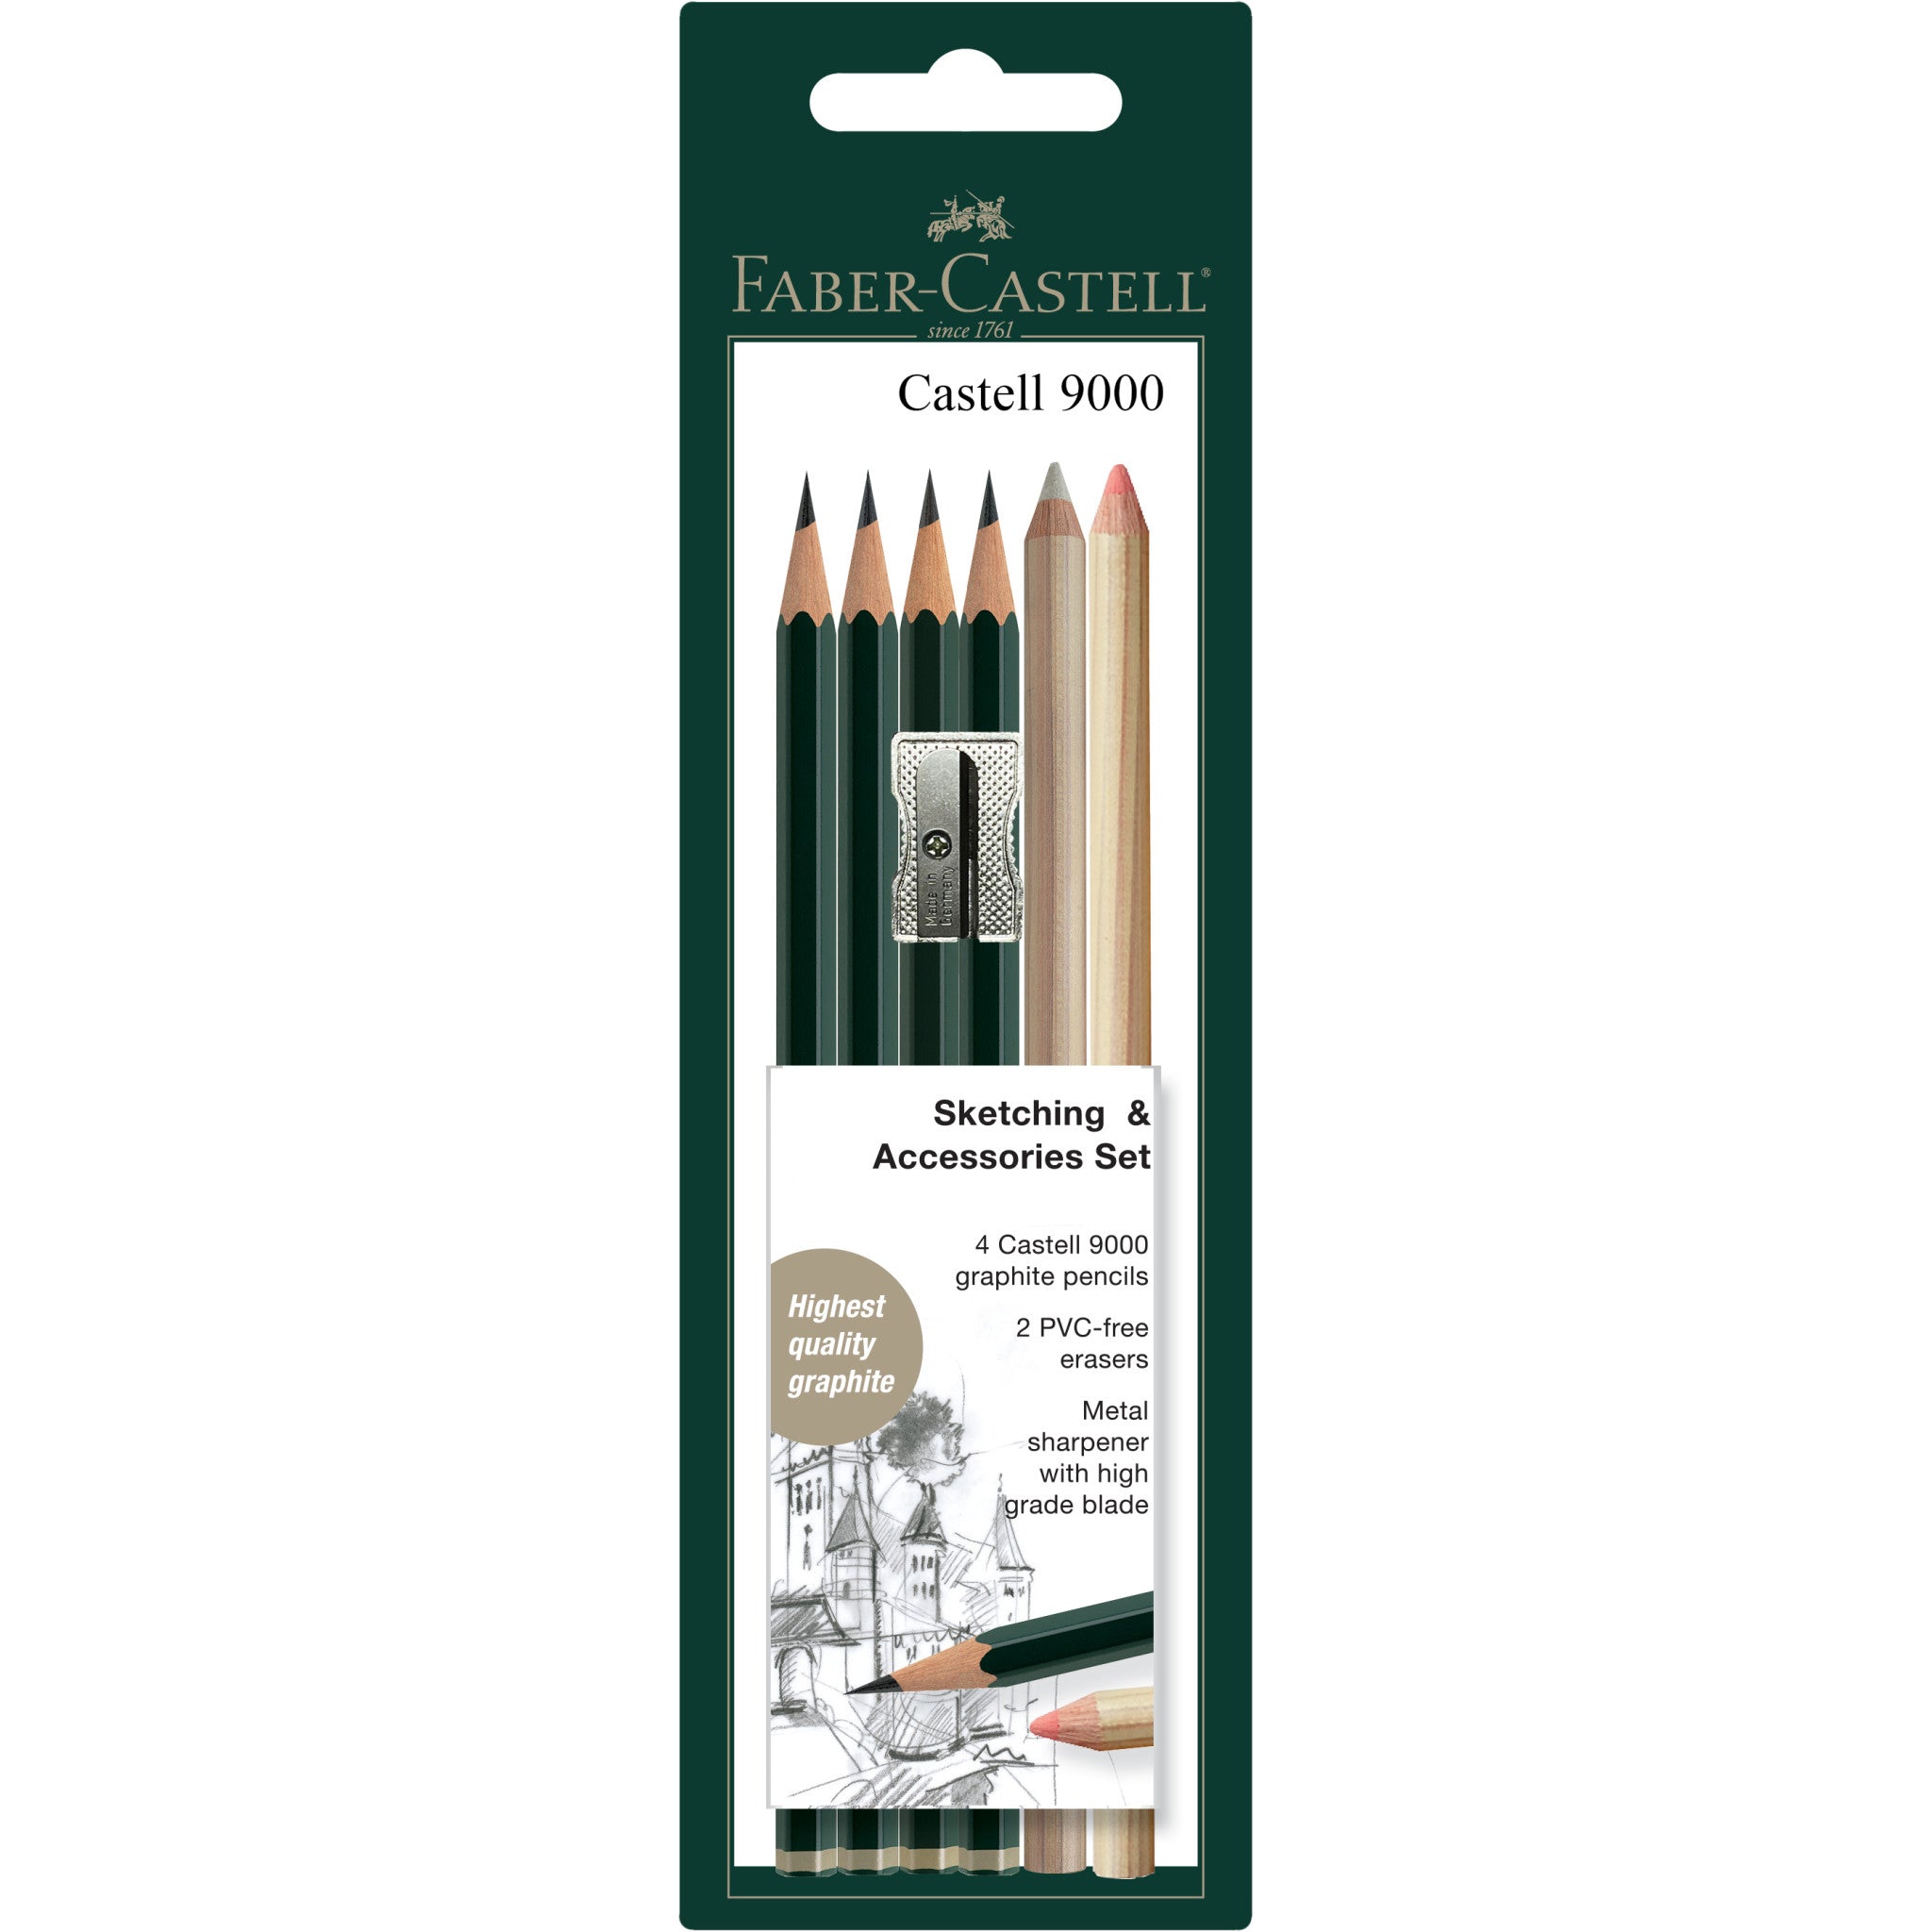 Faber-Castell Drawing and Sketching Kit, Ages 9+ – Dragonfly Castle